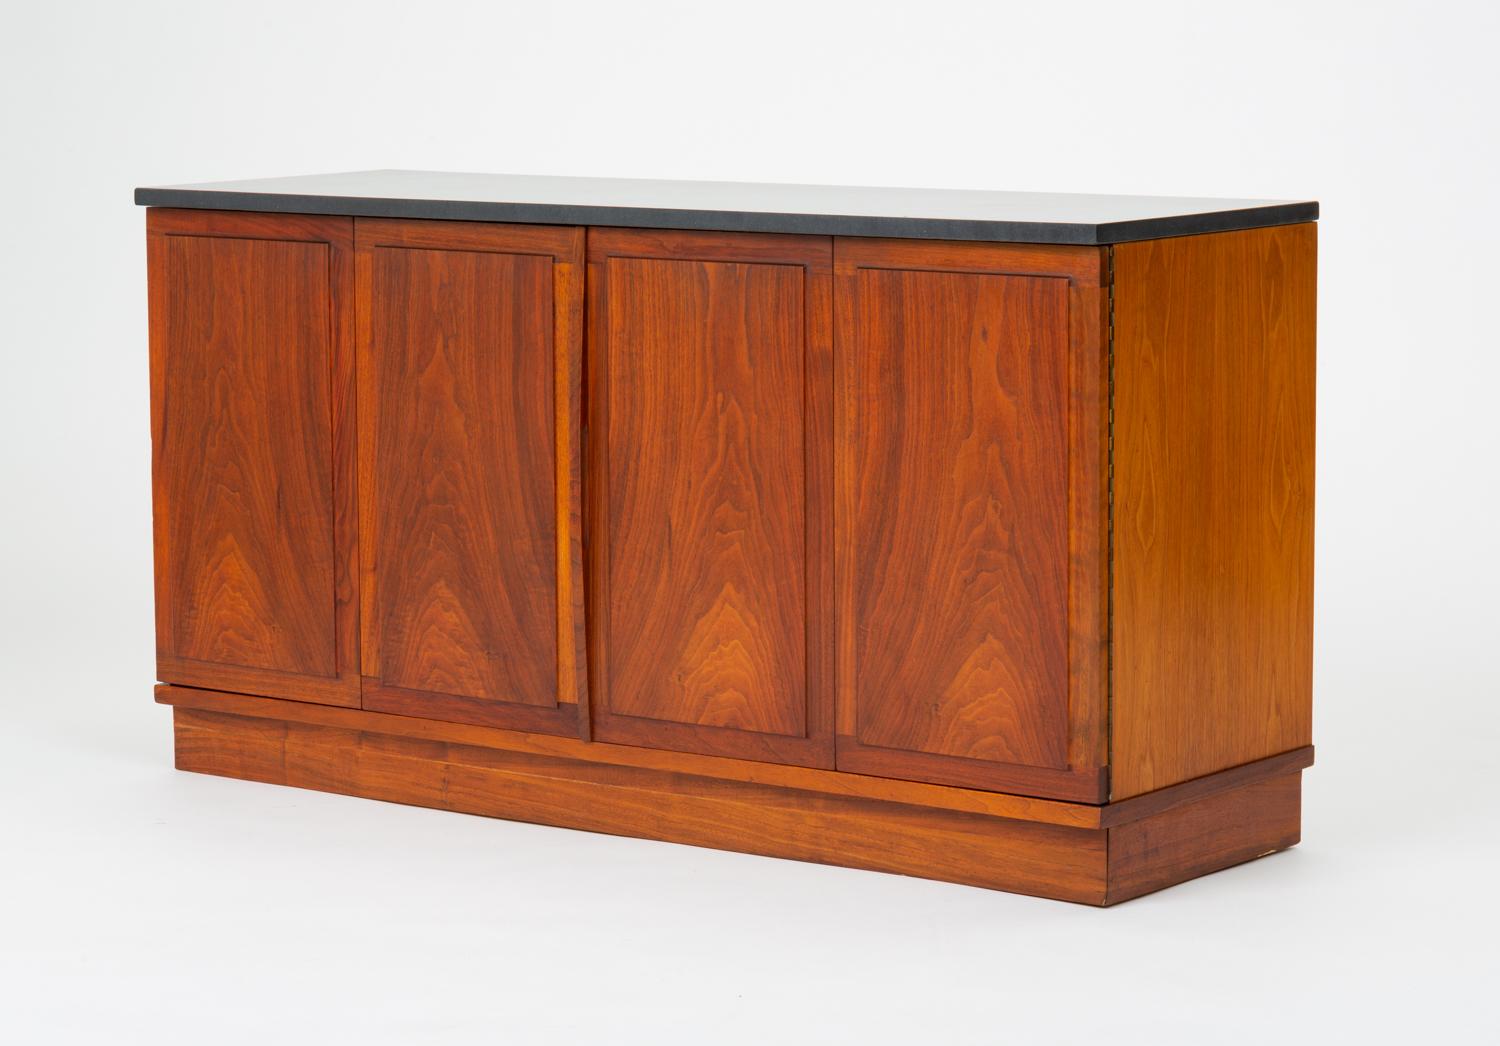 American Slate-Top Walnut Sideboard by Jack Cartwright for Founders